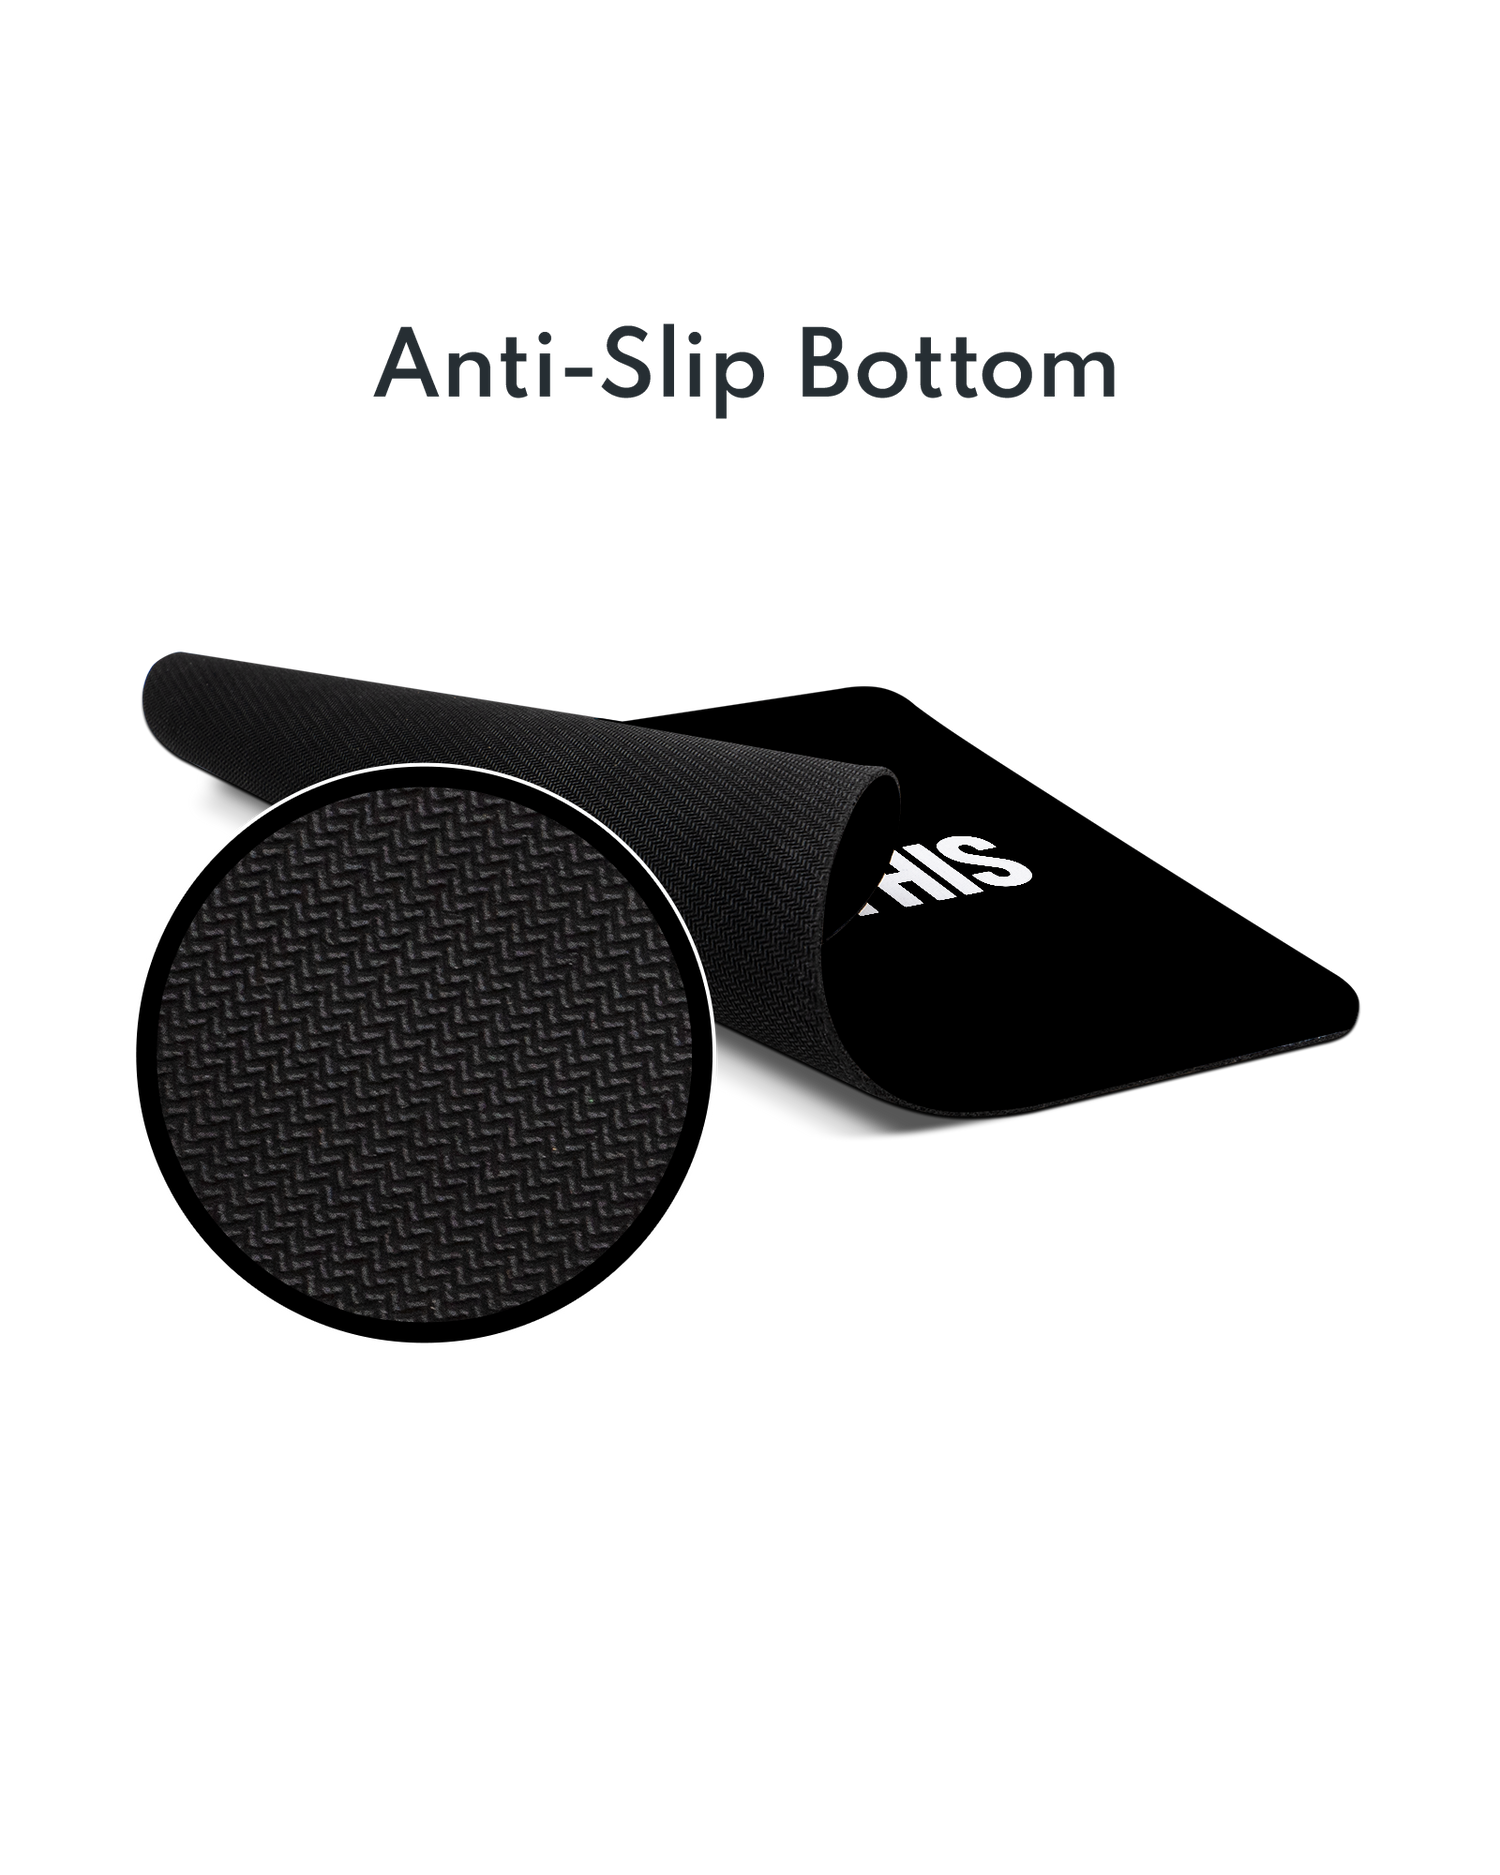 You Got This Black Mouse Pad with Non-slip Underside